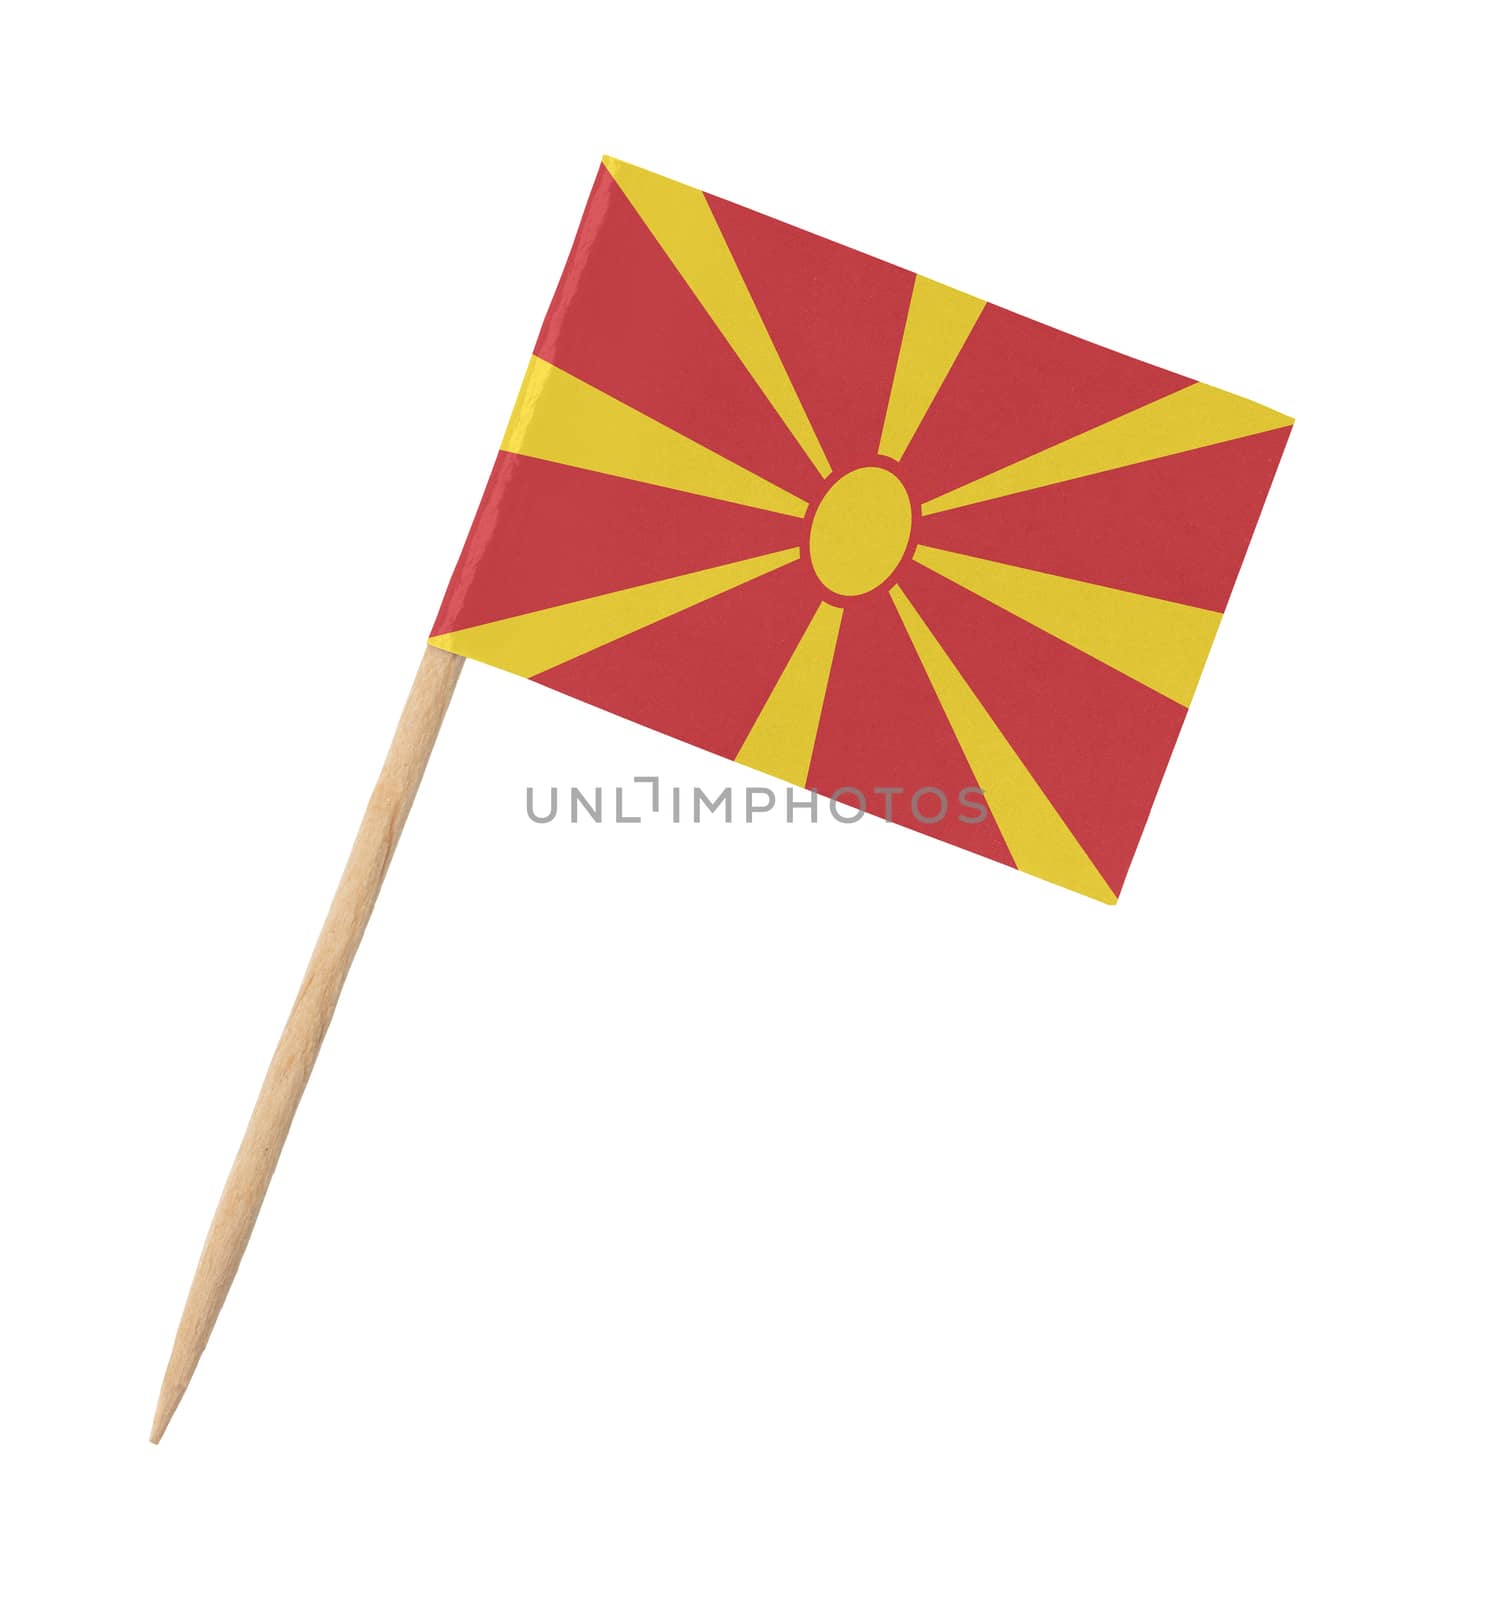 Small paper flag of Macedonia on wooden stick by michaklootwijk